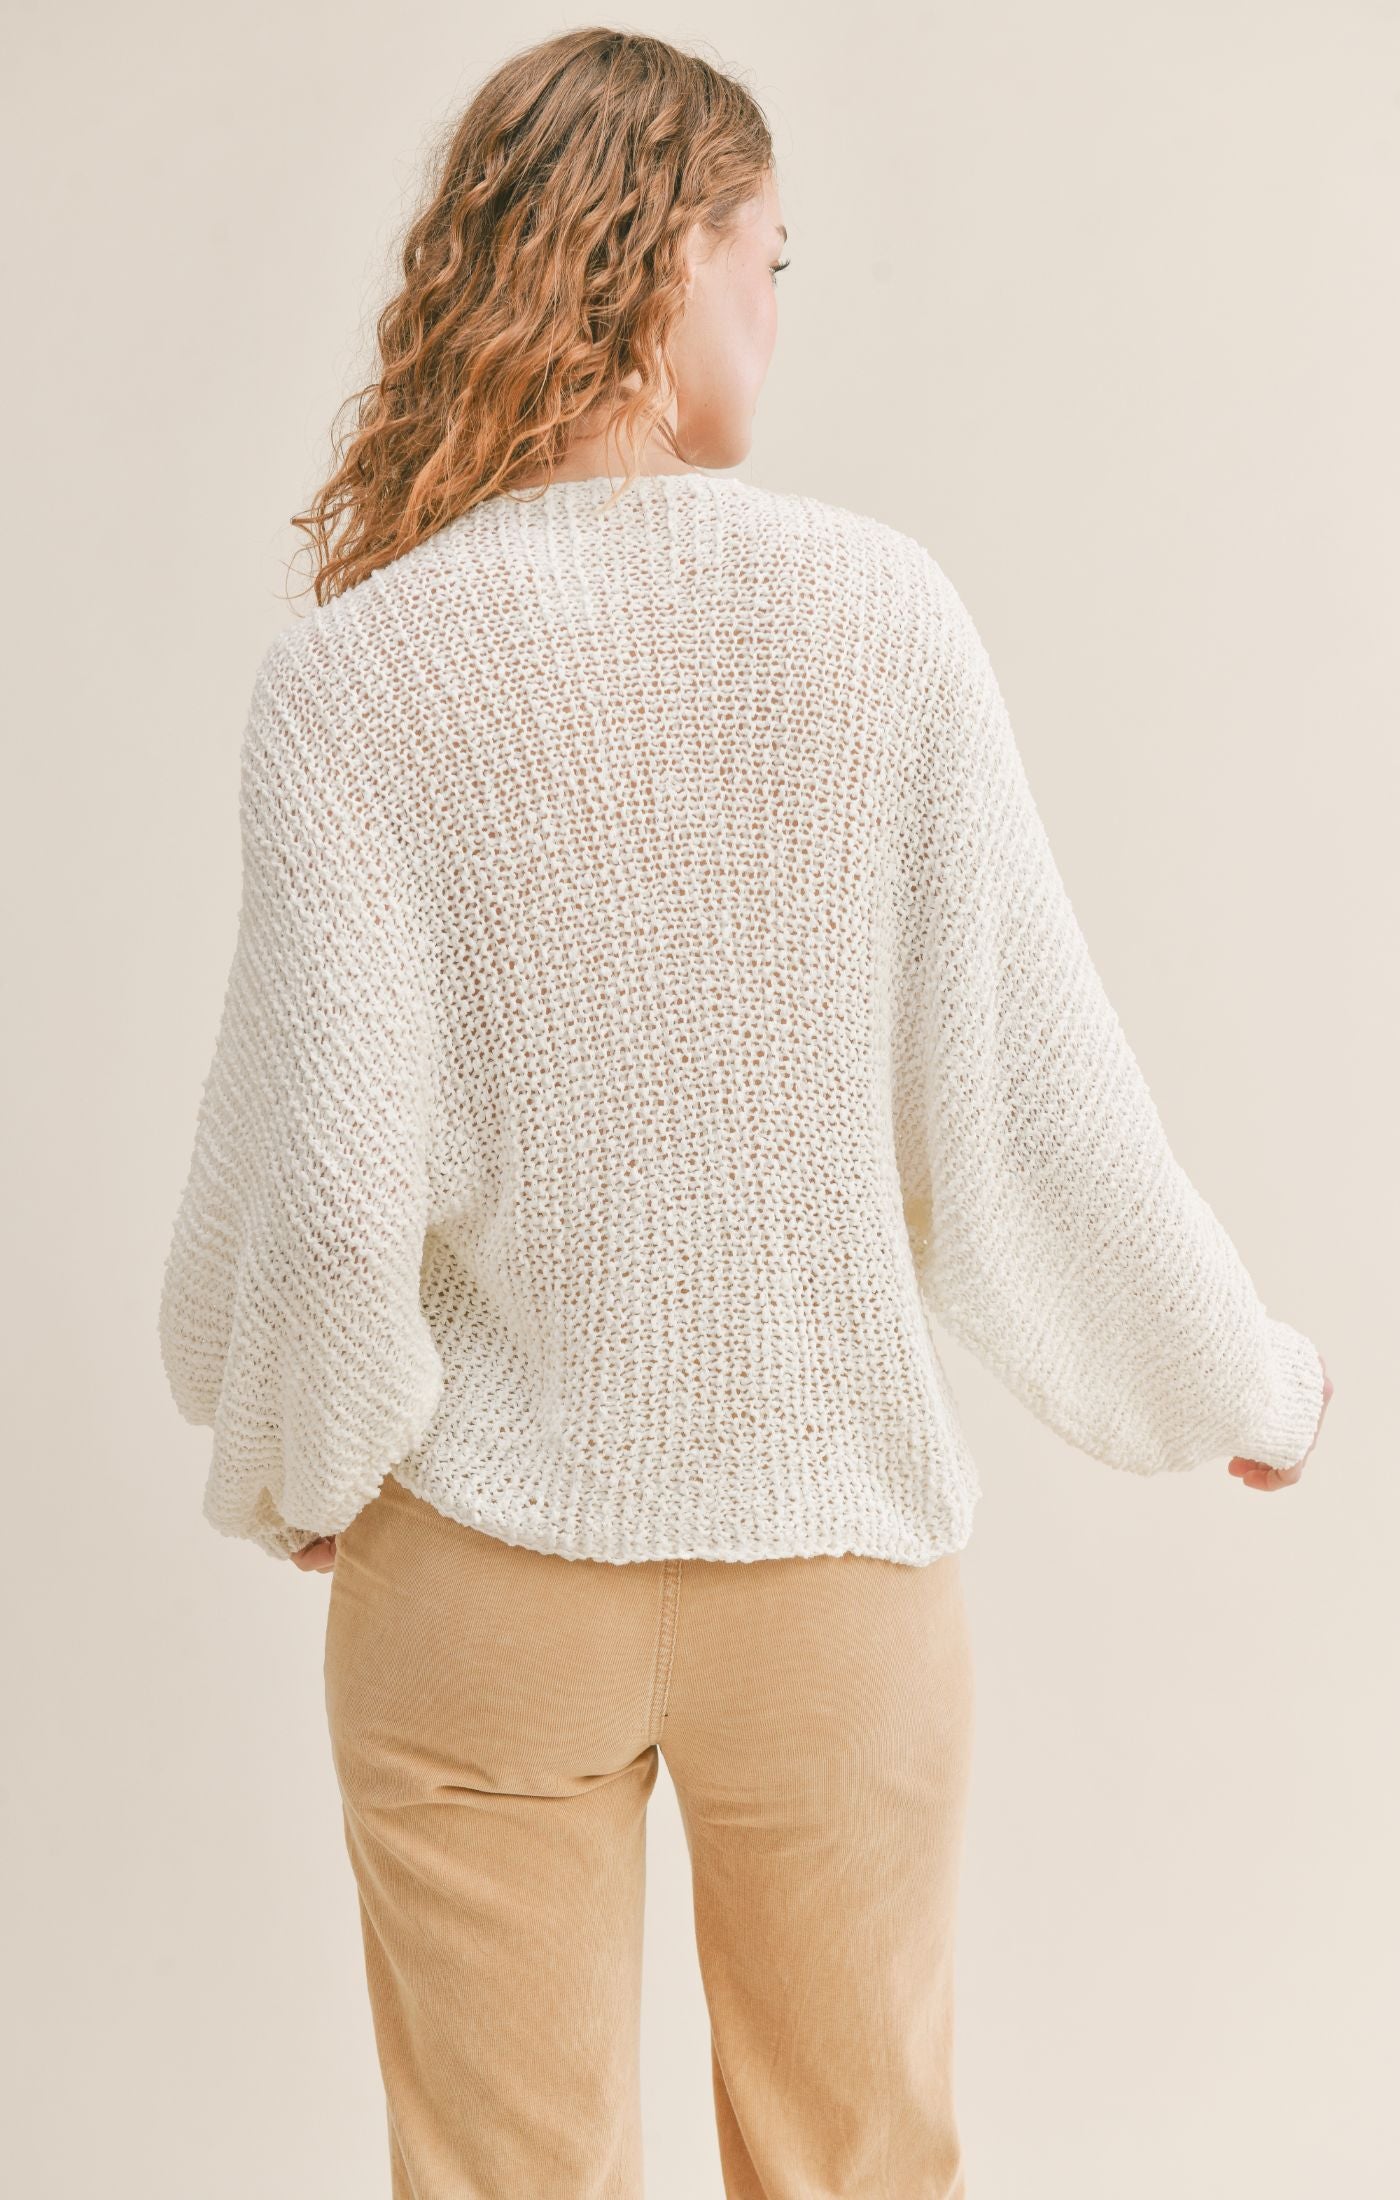 The Maison Open Knit Sweater